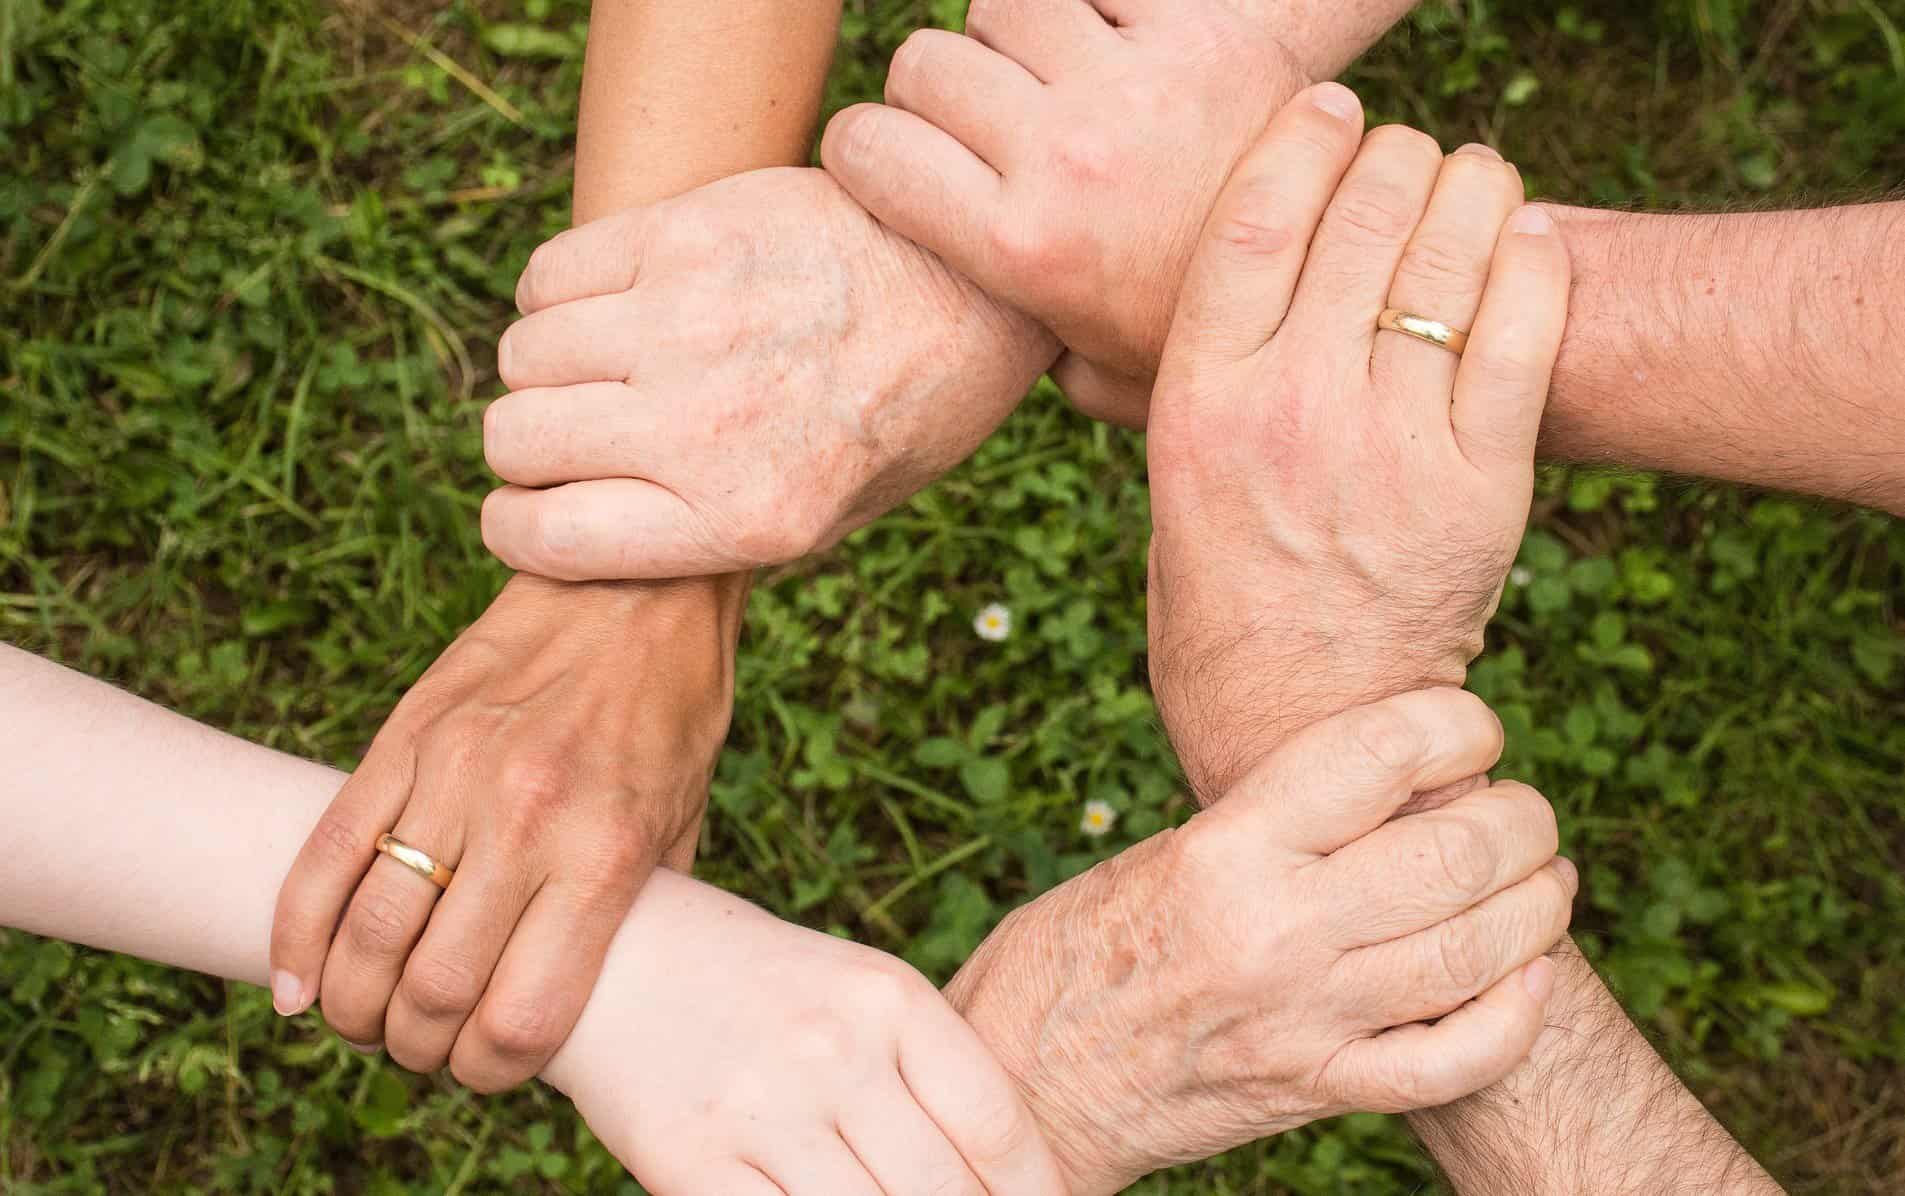 Six hands are shown over grass each holding another's wrists.